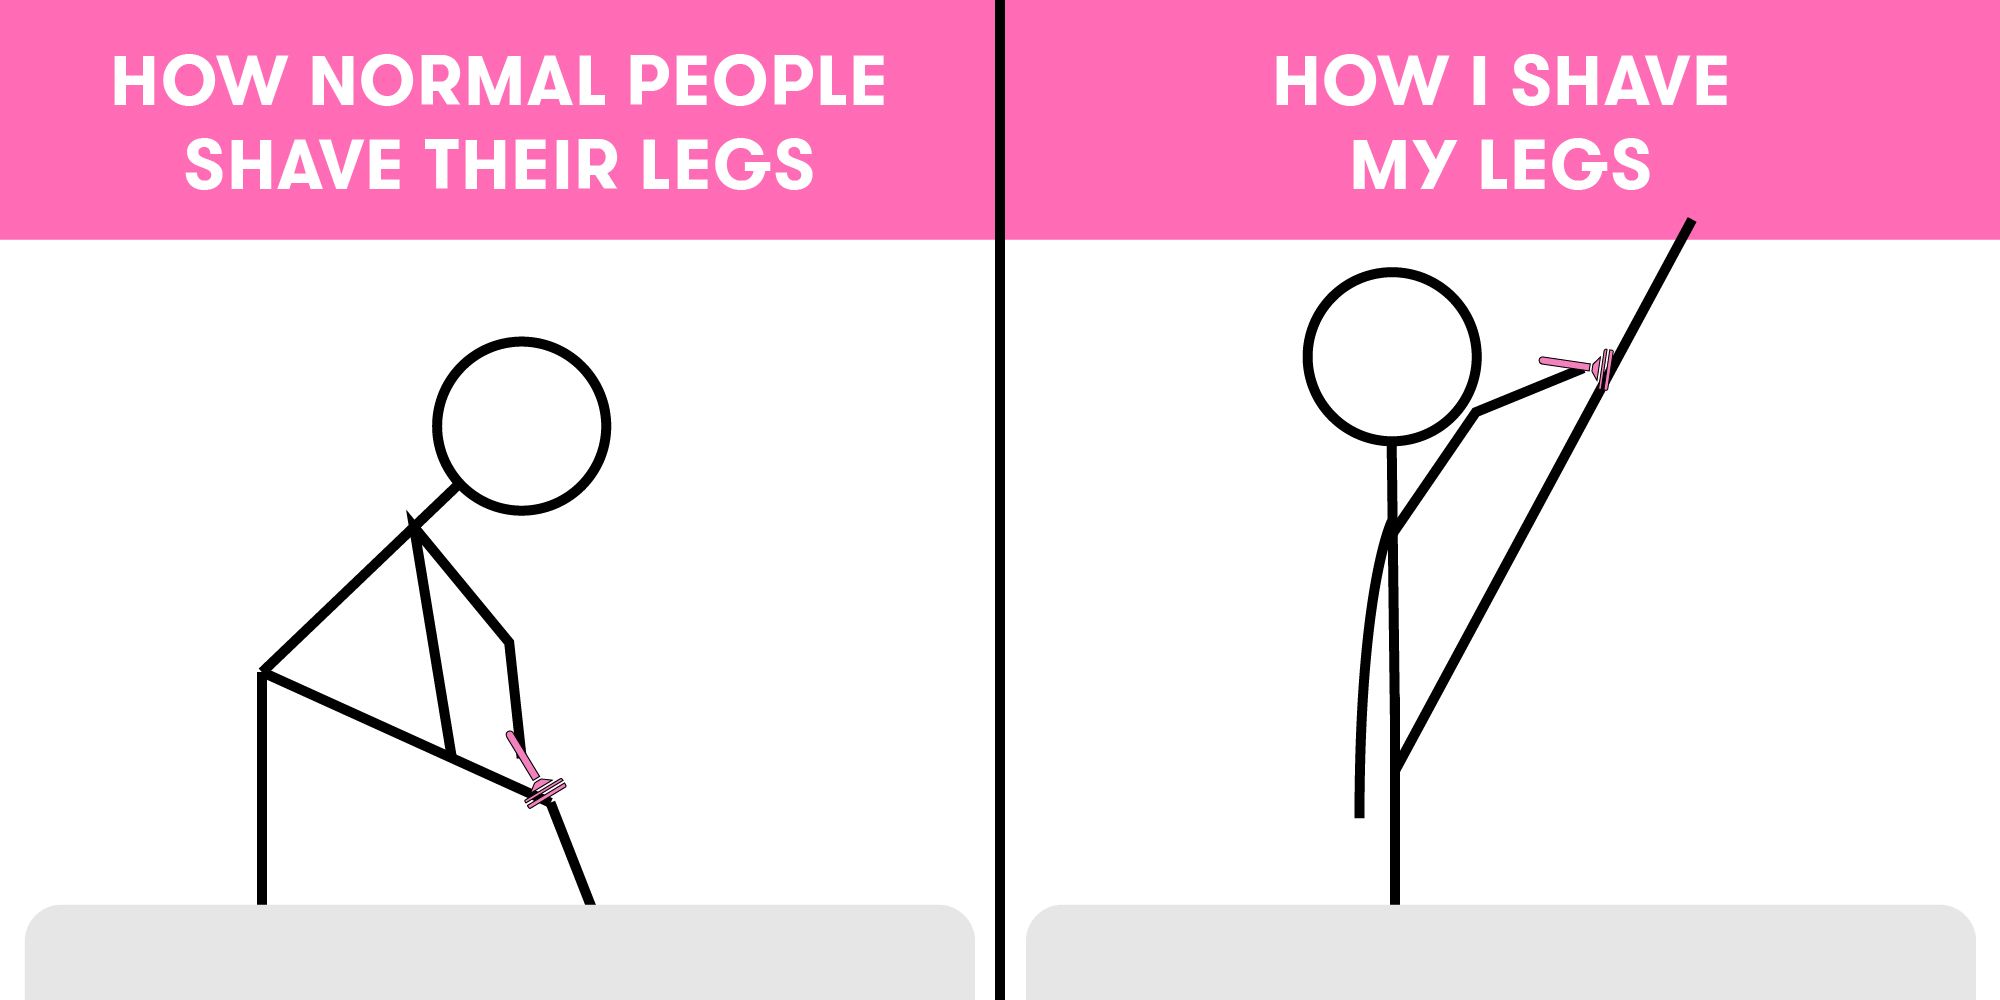 28 Things That Speak to Every Gymnast's Soul